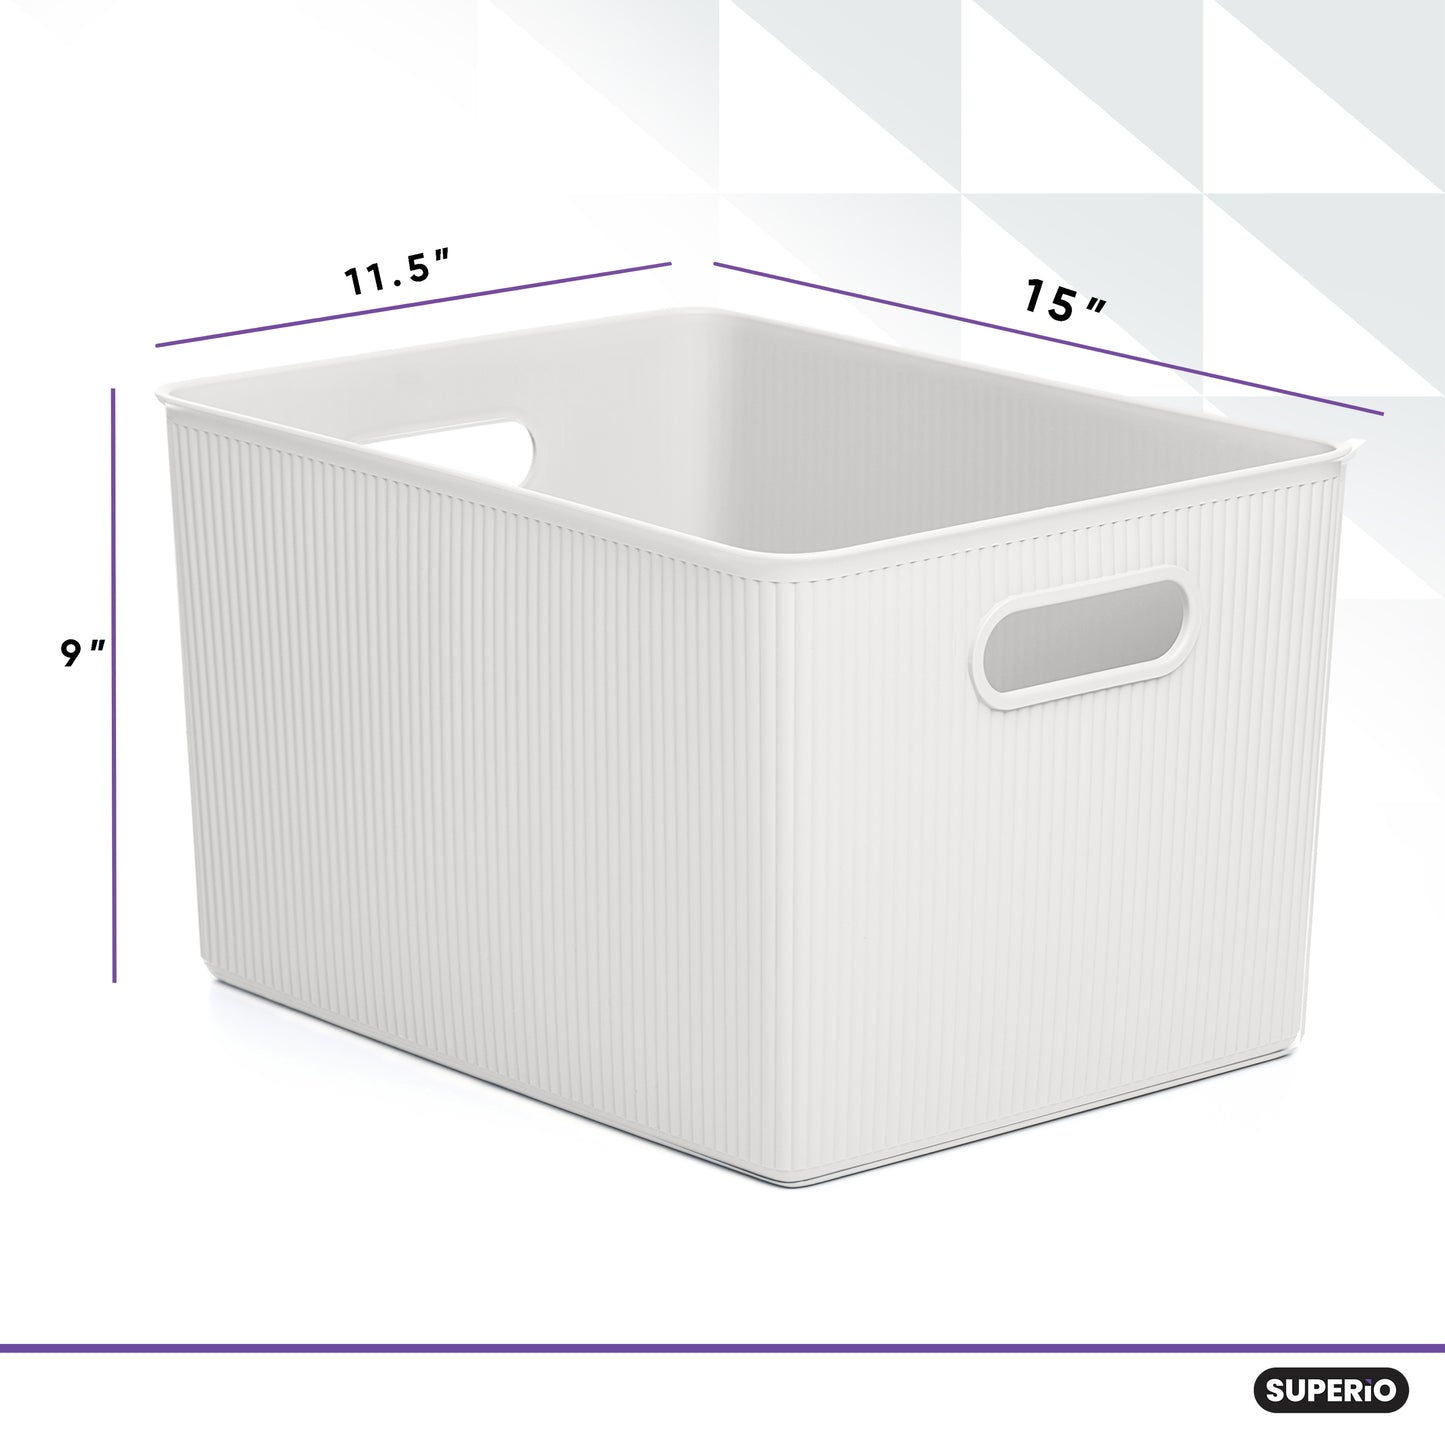 Large Decorative Plastic Bin with Cutout Handles White - Brightroom™